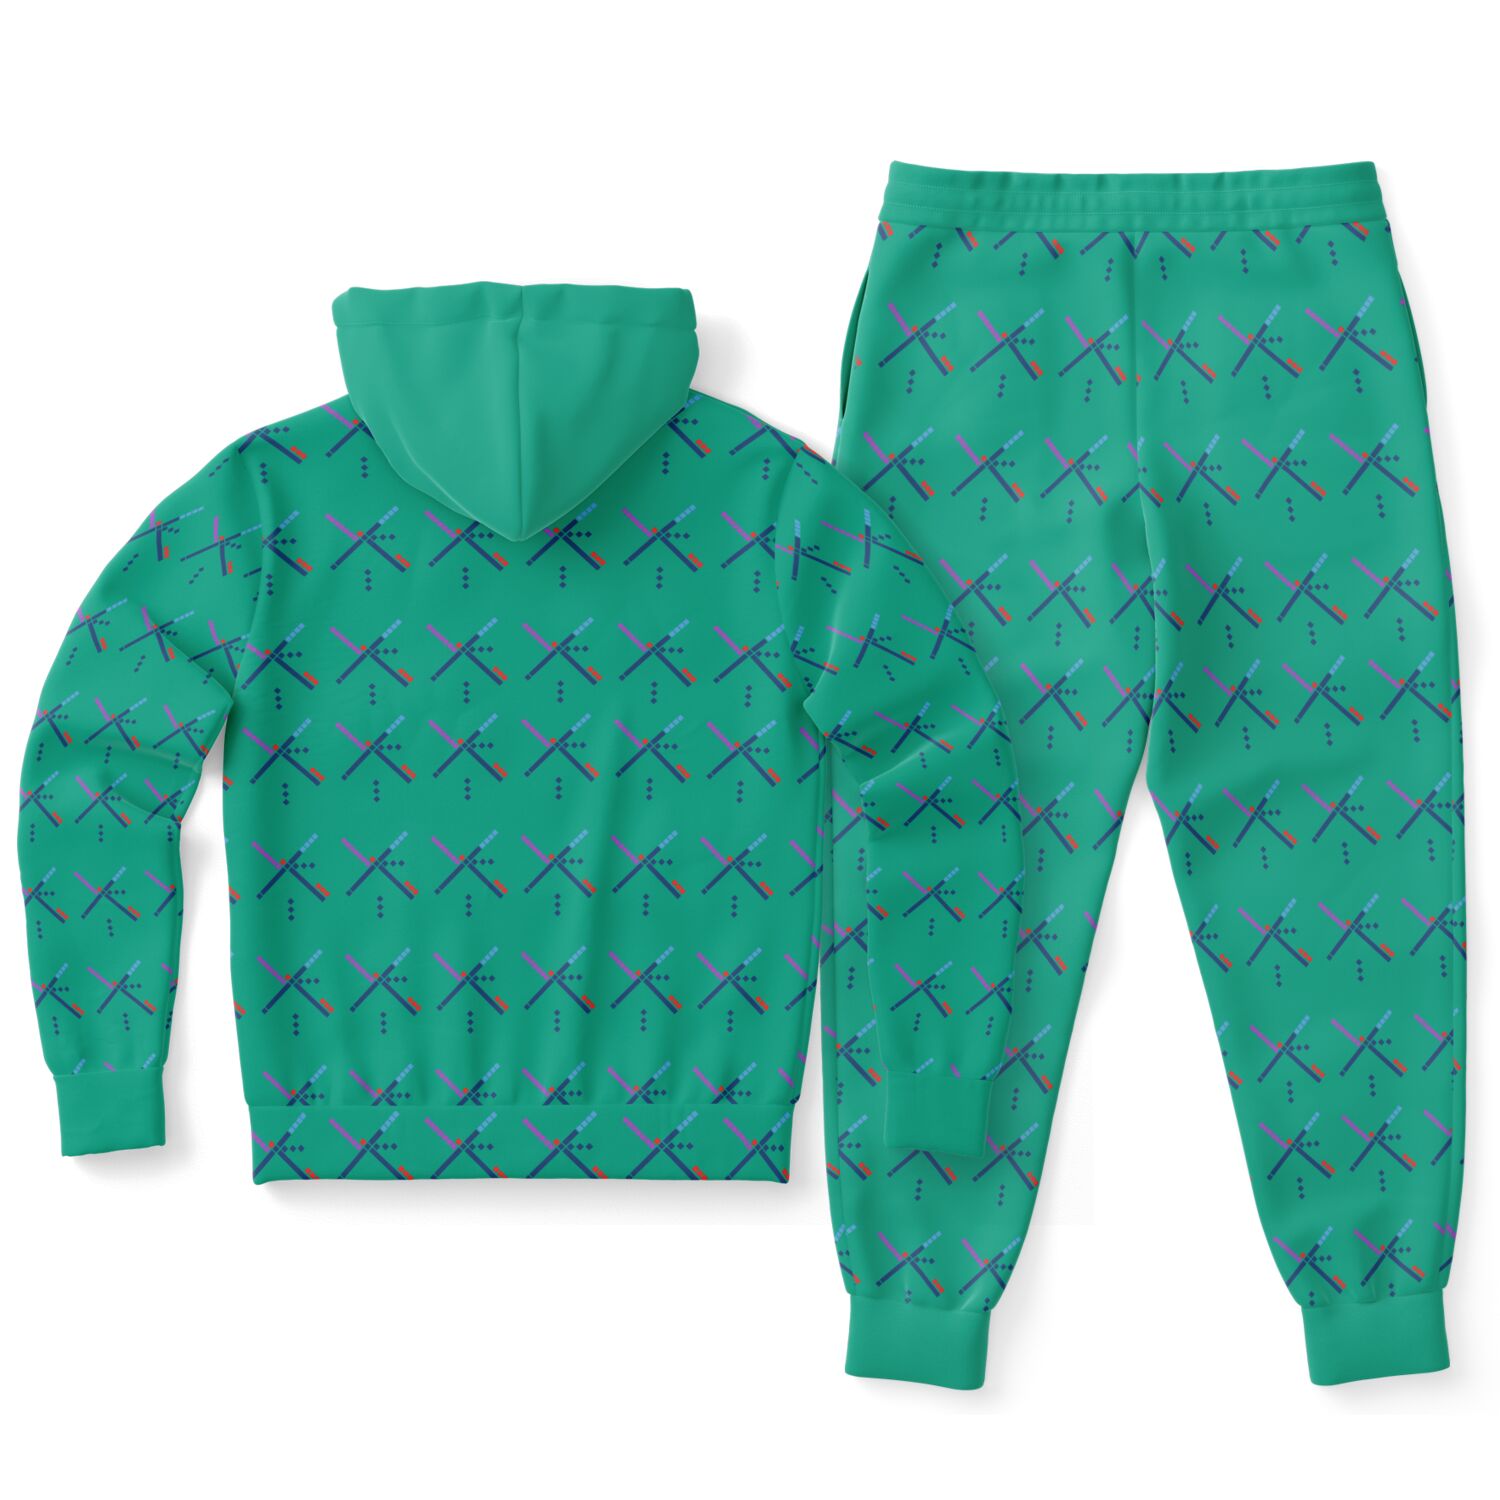 PDX Airport Hoodie and Jogger Set